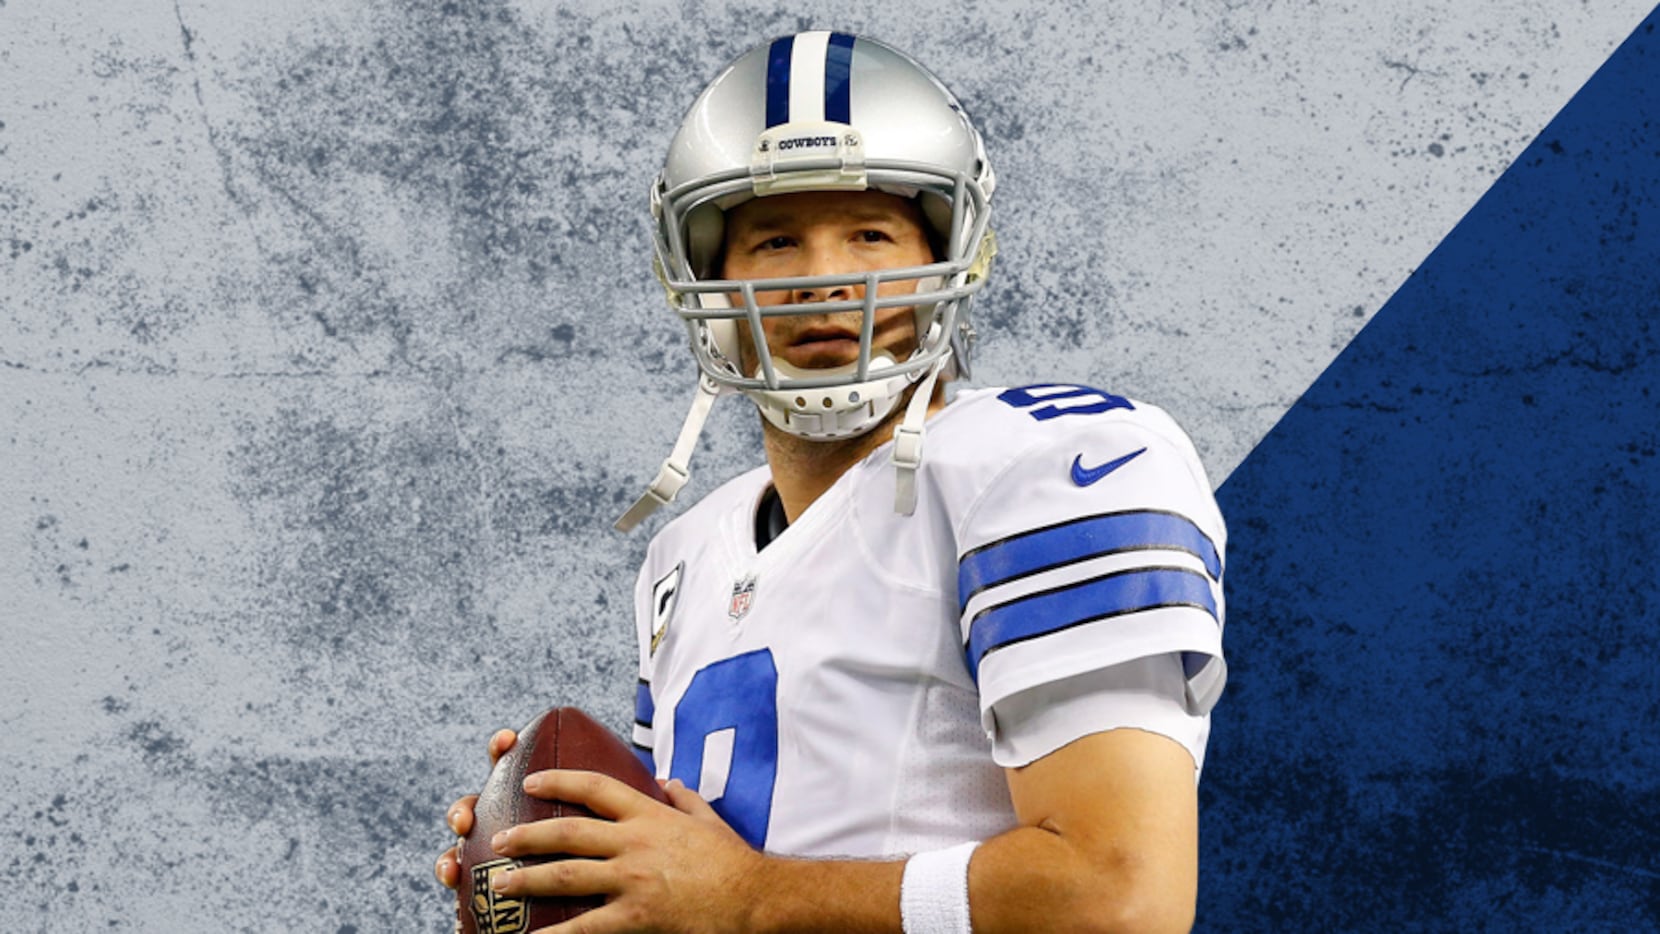 Where will Cowboys QB Tony Romo end up in 2017?